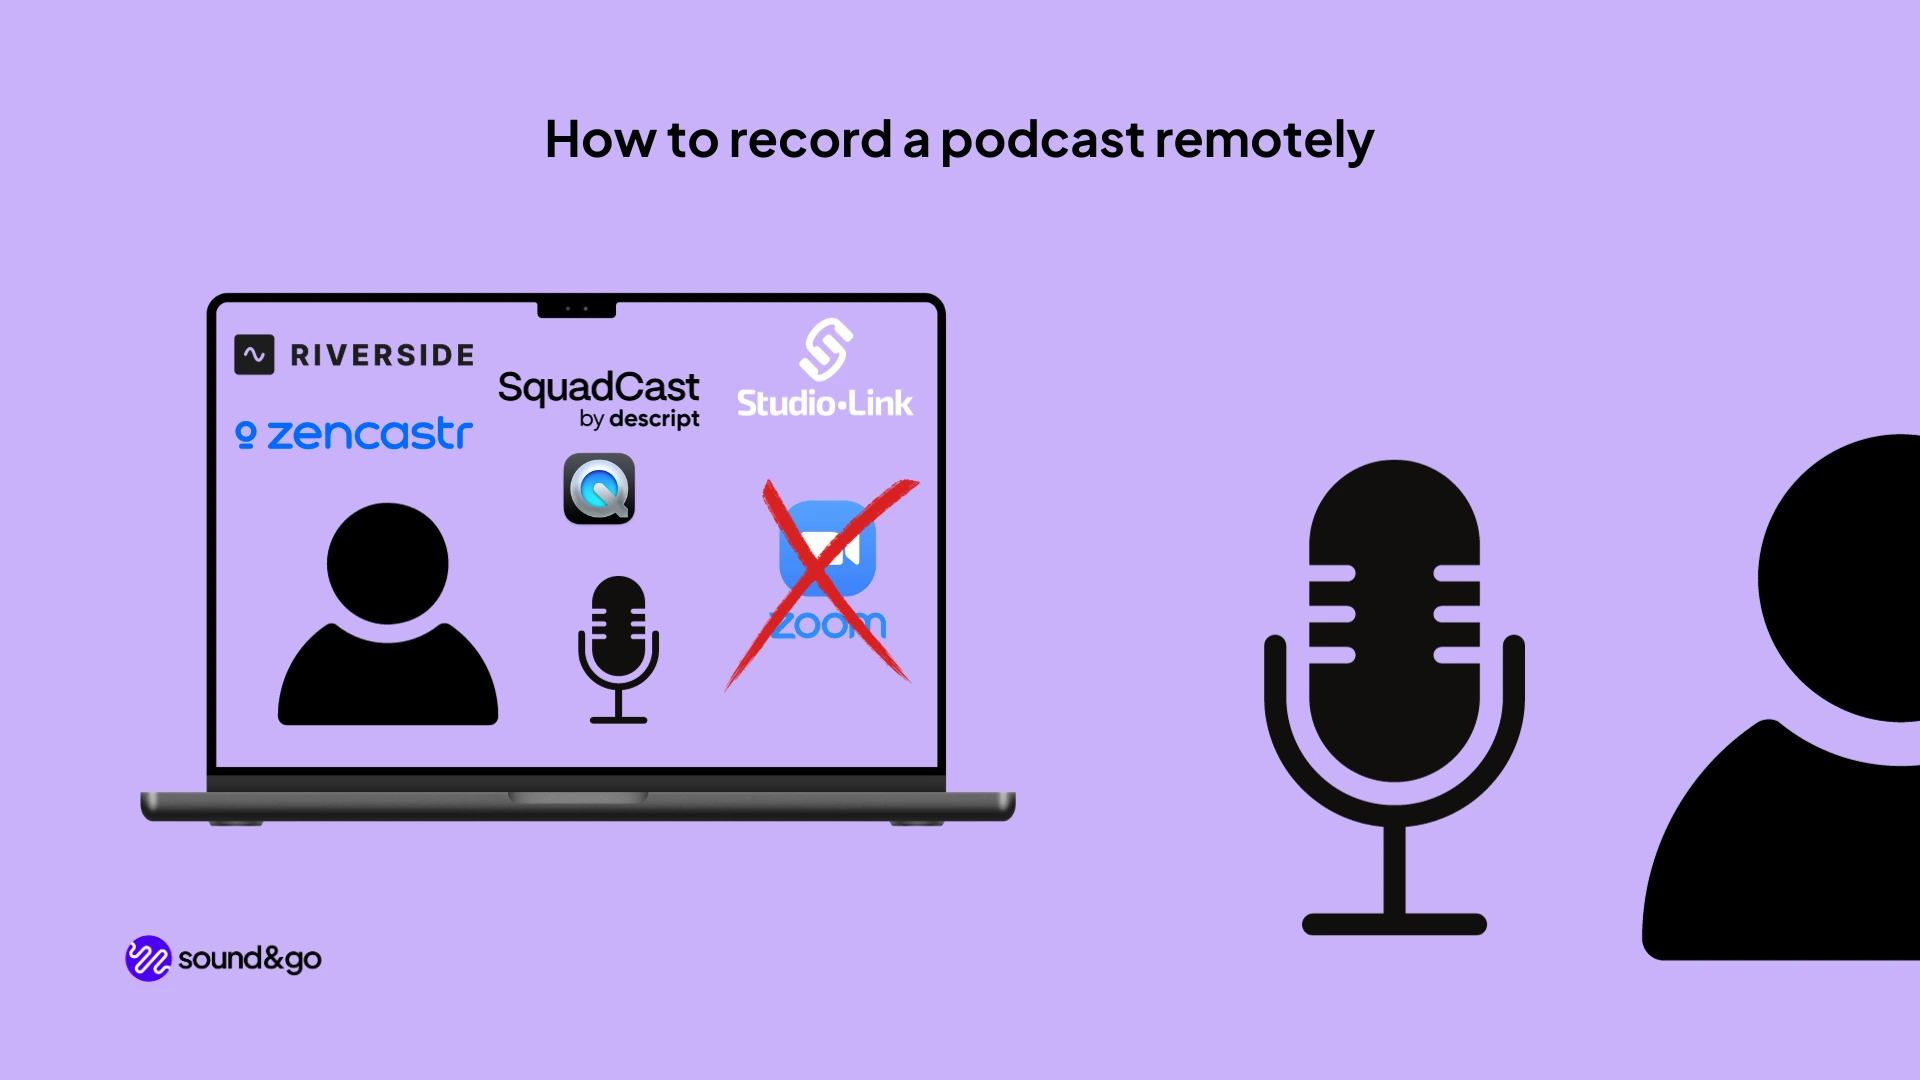 How to record a podcast remotely